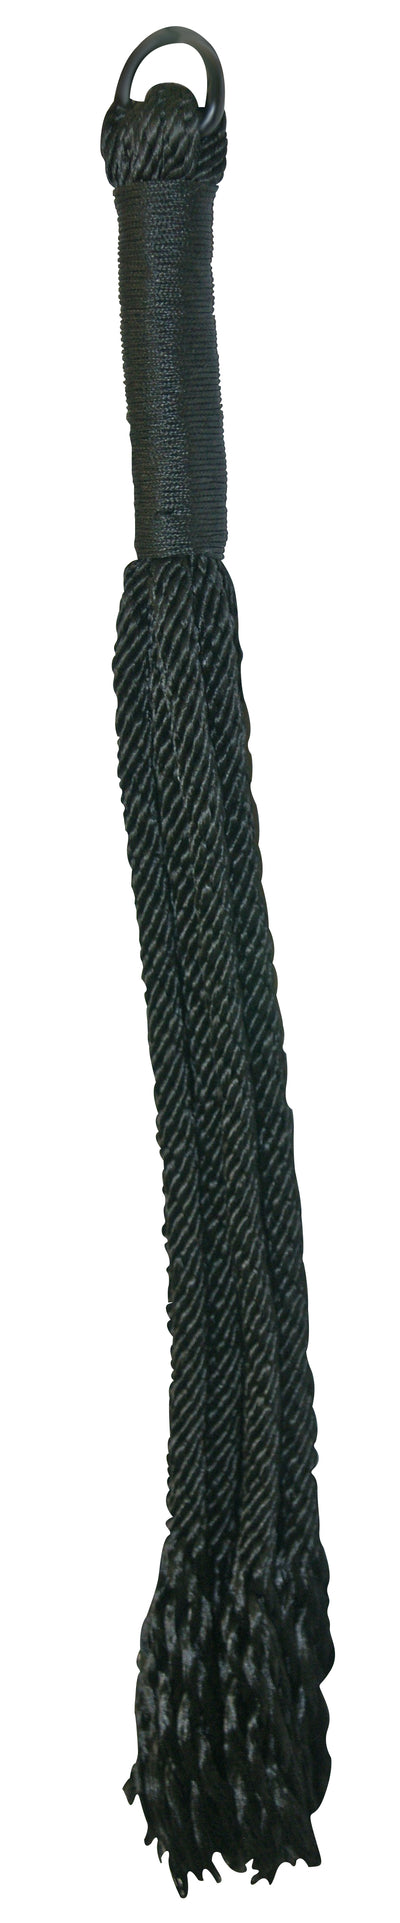 Shadow Rope Flogger: A Naughty and Nice Addition to Your Playtime!